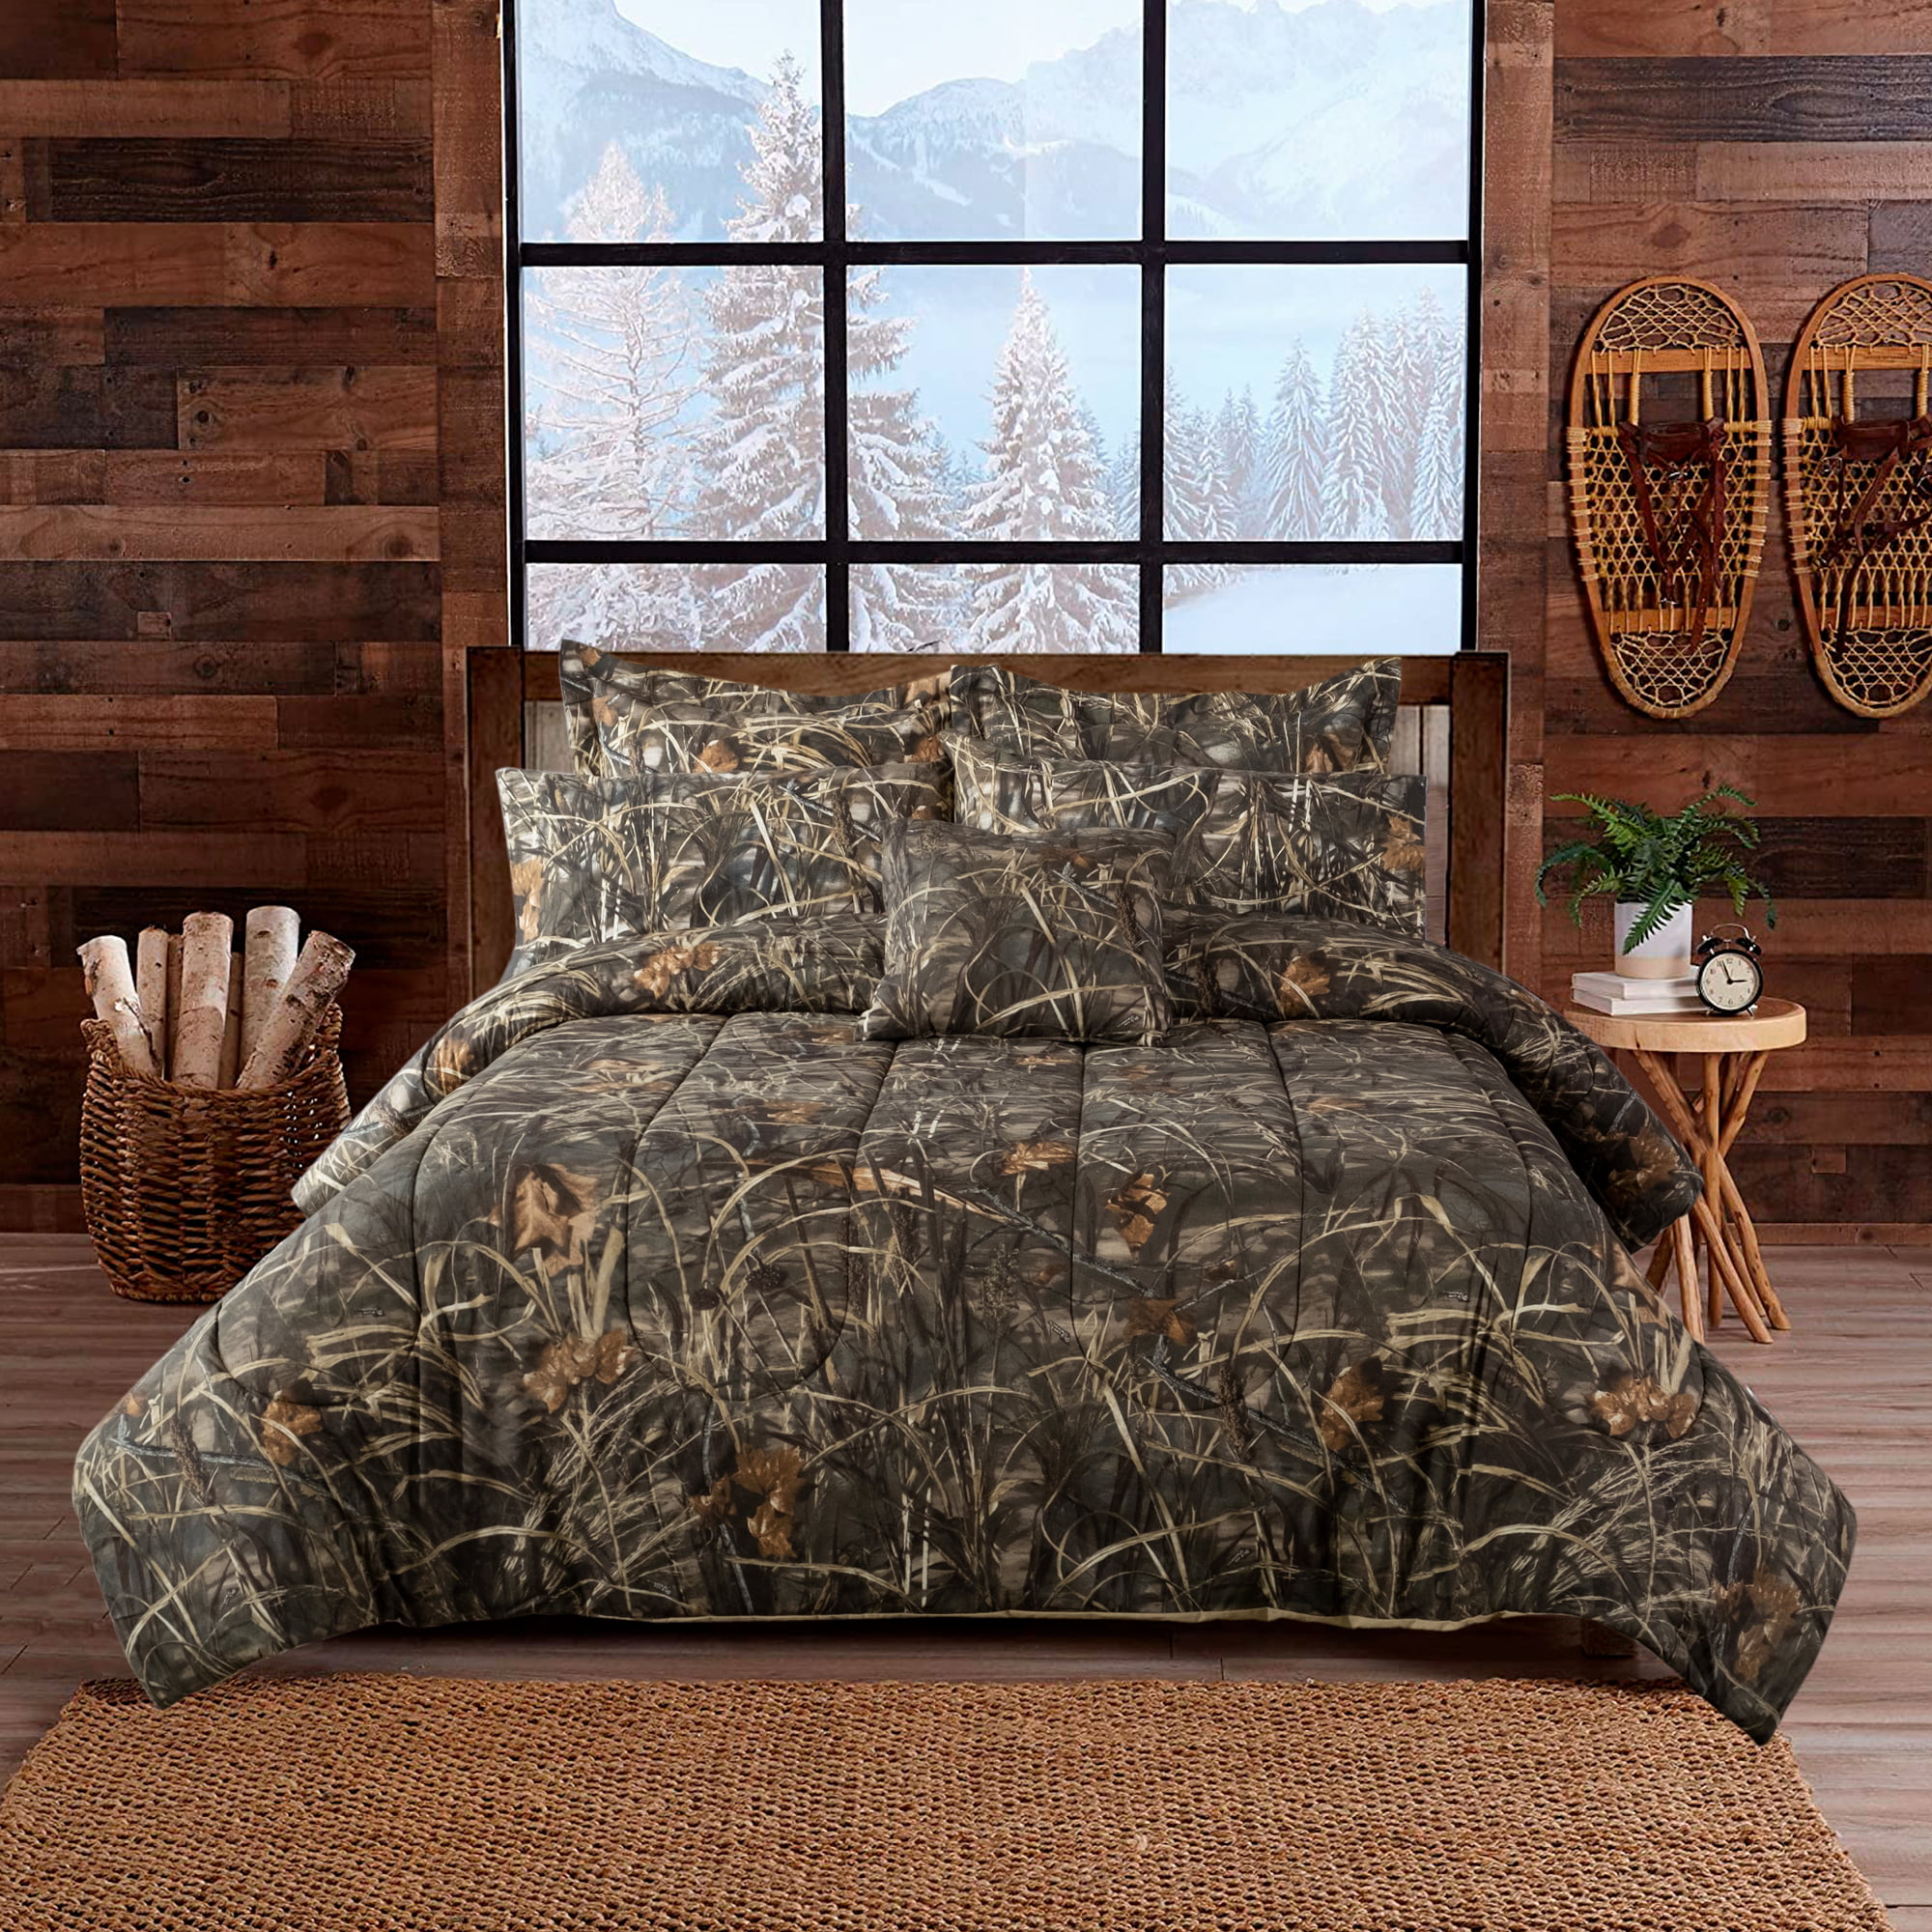 New Camouflage Full Size Comforter Set Plaid Sheets Camo Bedding Boy's Bedspread 